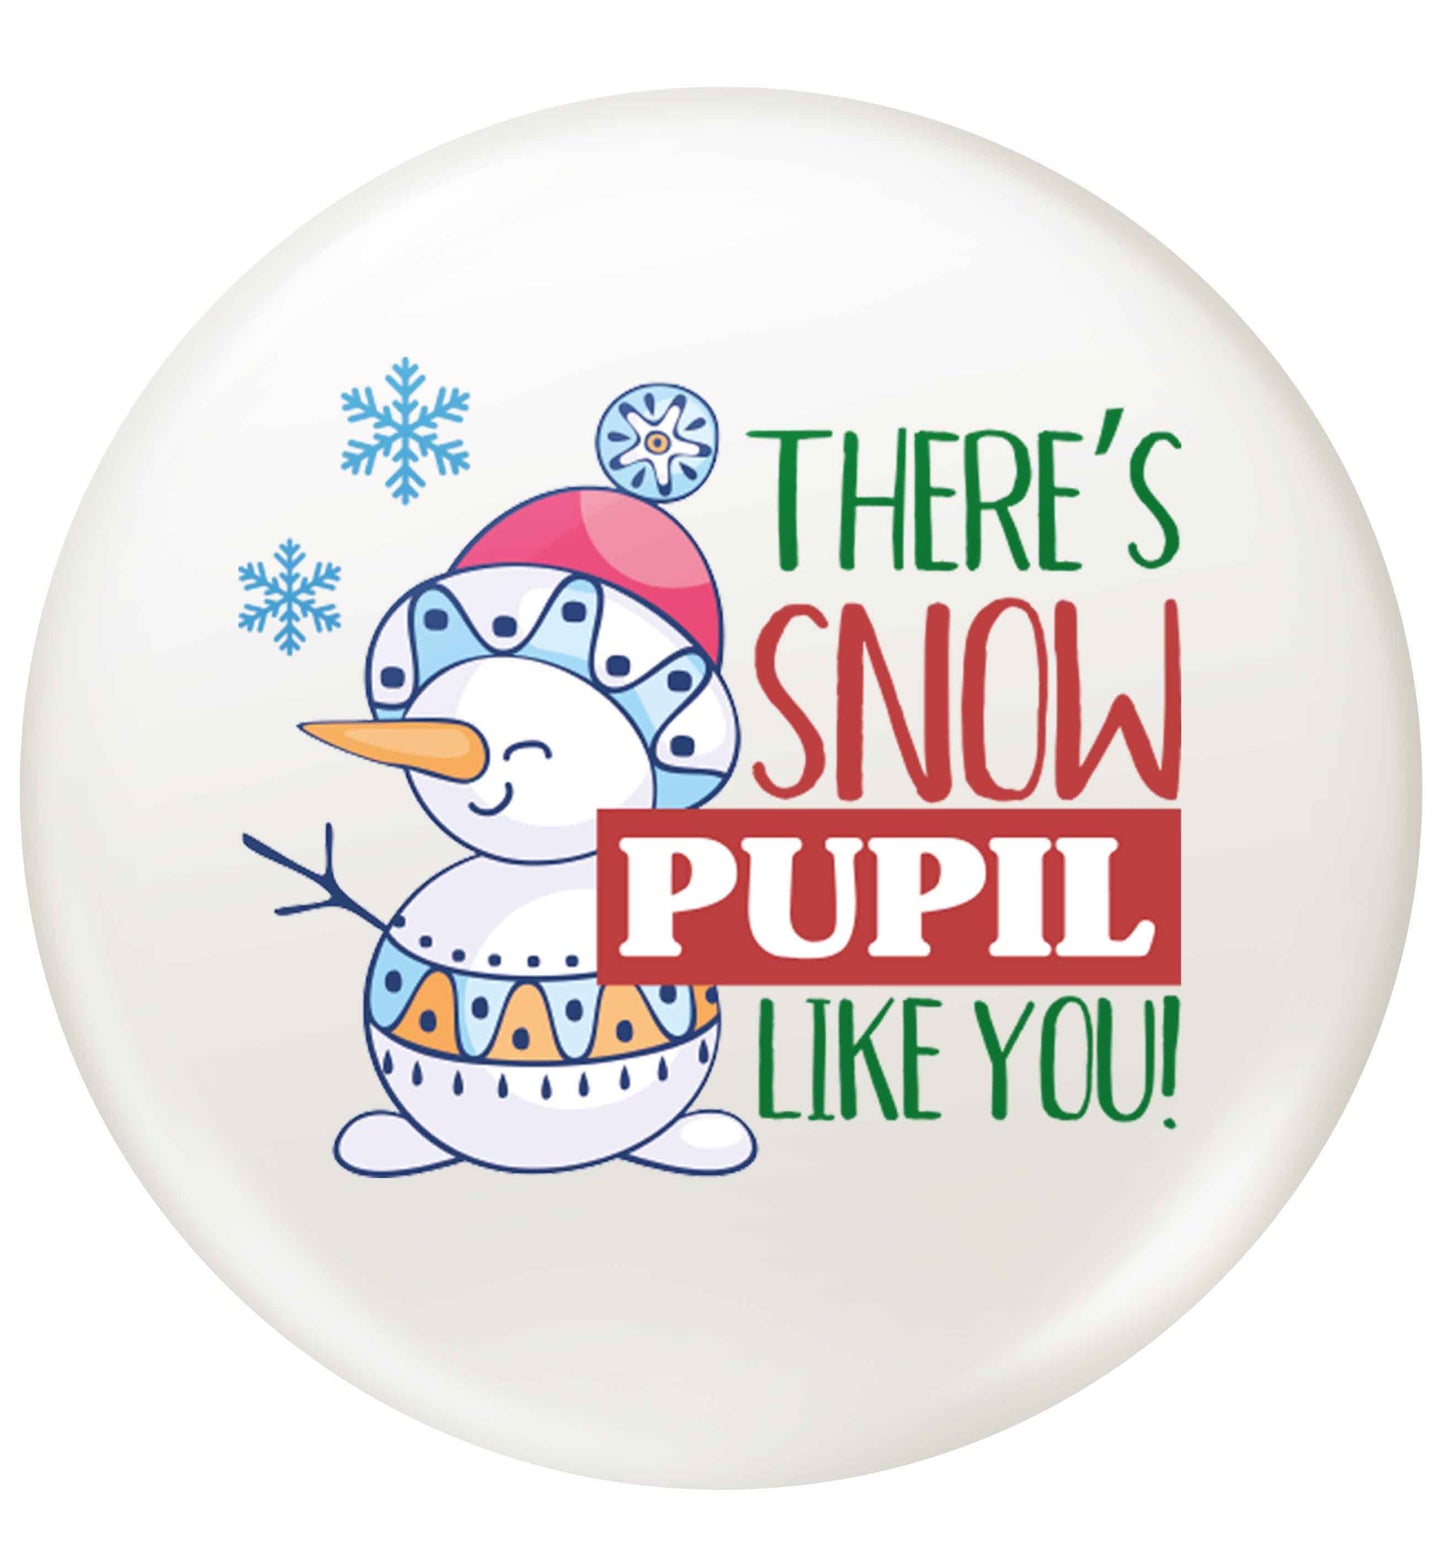 There's snow pupil like you small 25mm Pin badge